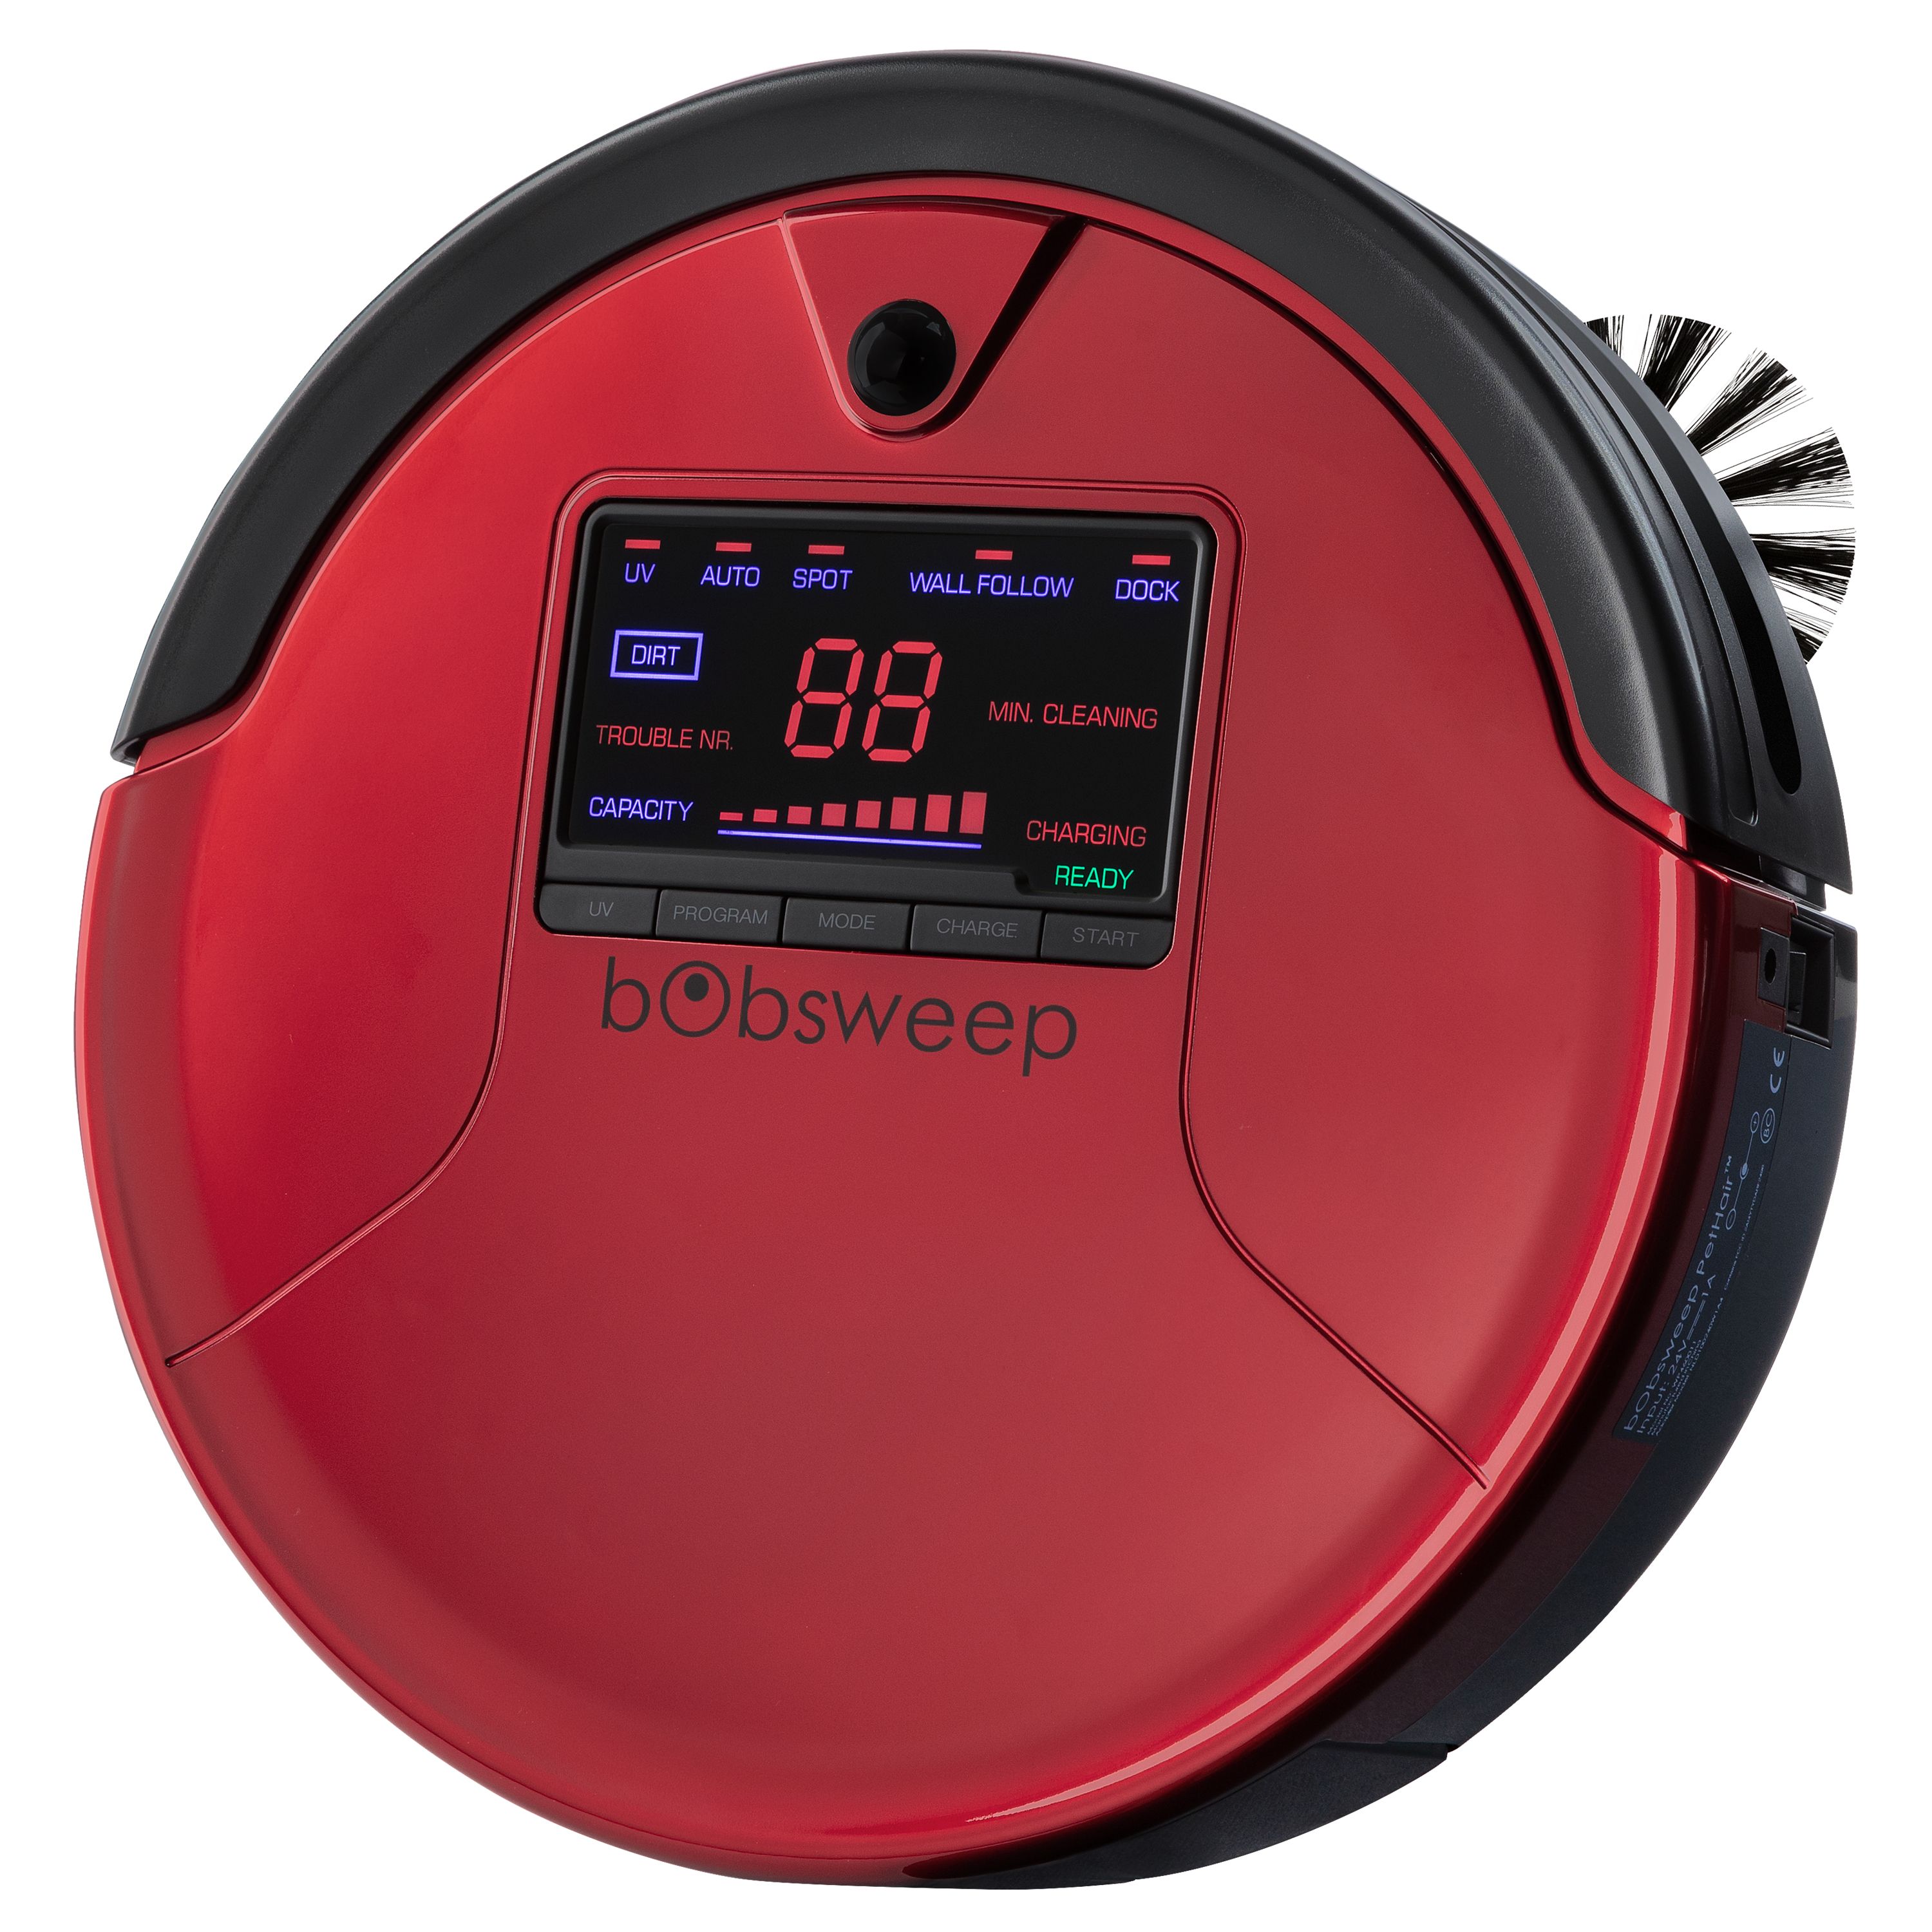 Bobsweep Pet Hair Robotic Vacuum Cleaner and Mop, Rouge - image 2 of 9